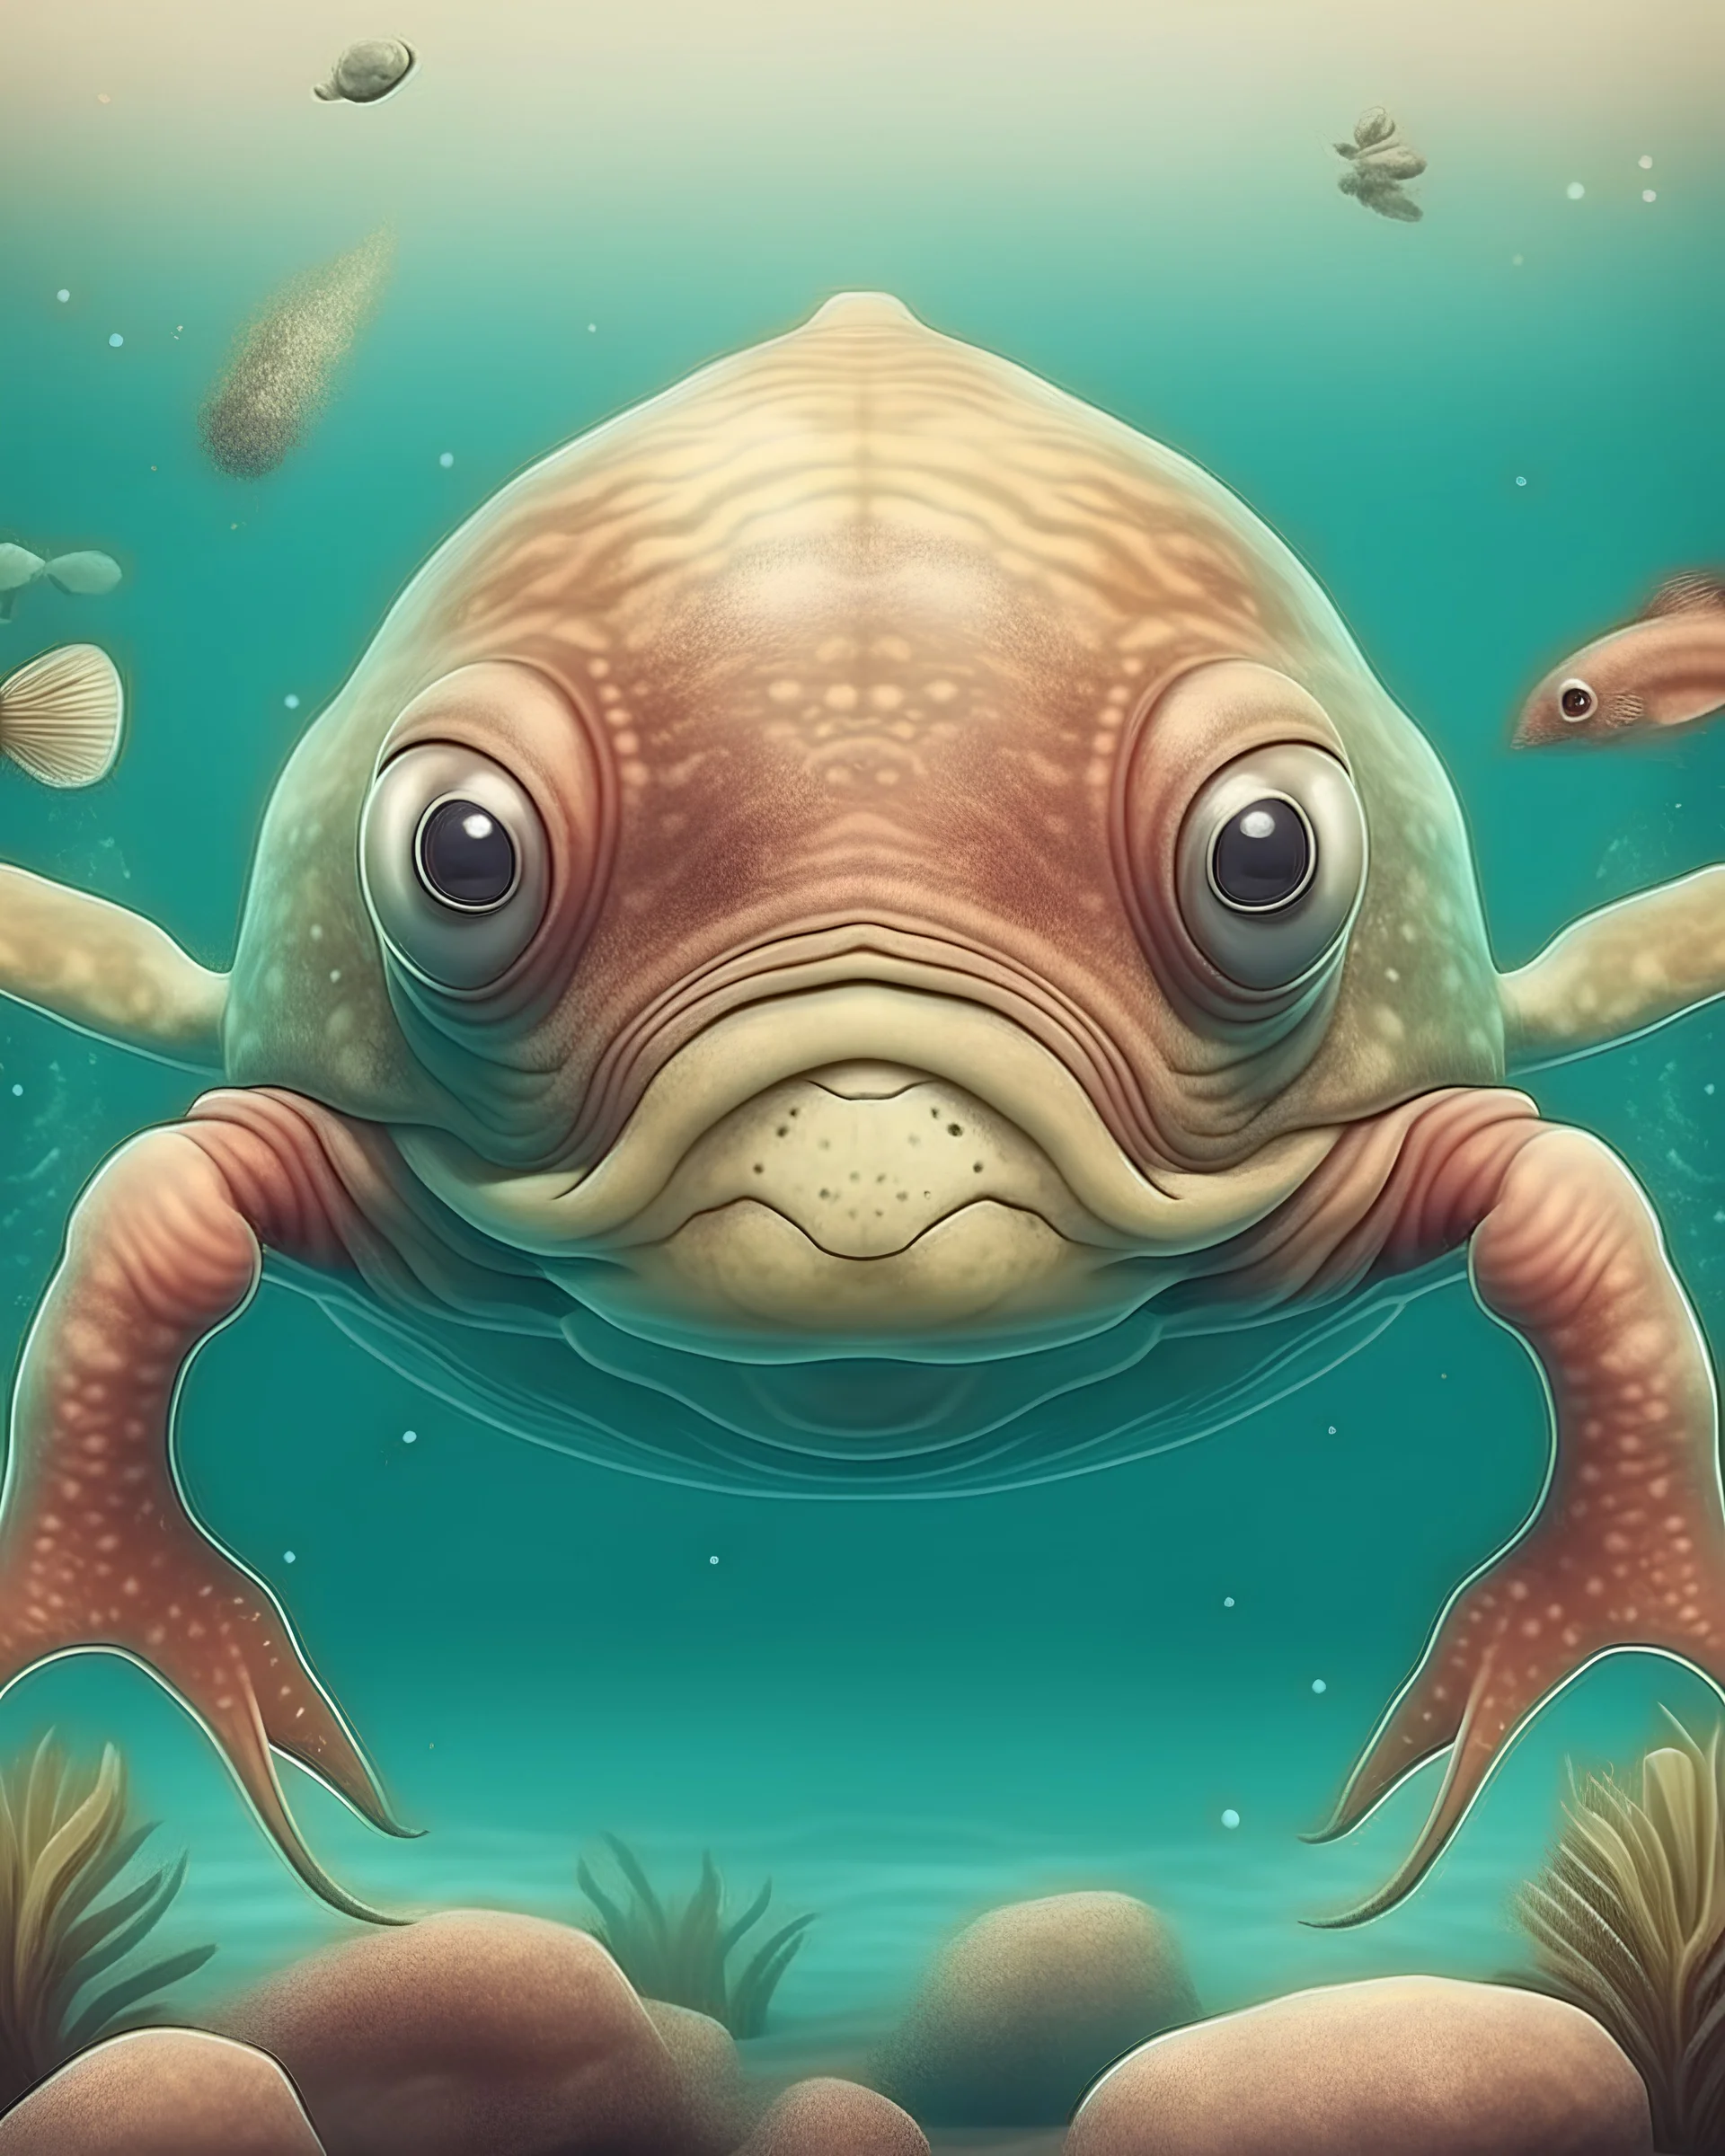 can you create a beautiful realistic sea animal in vintage theme